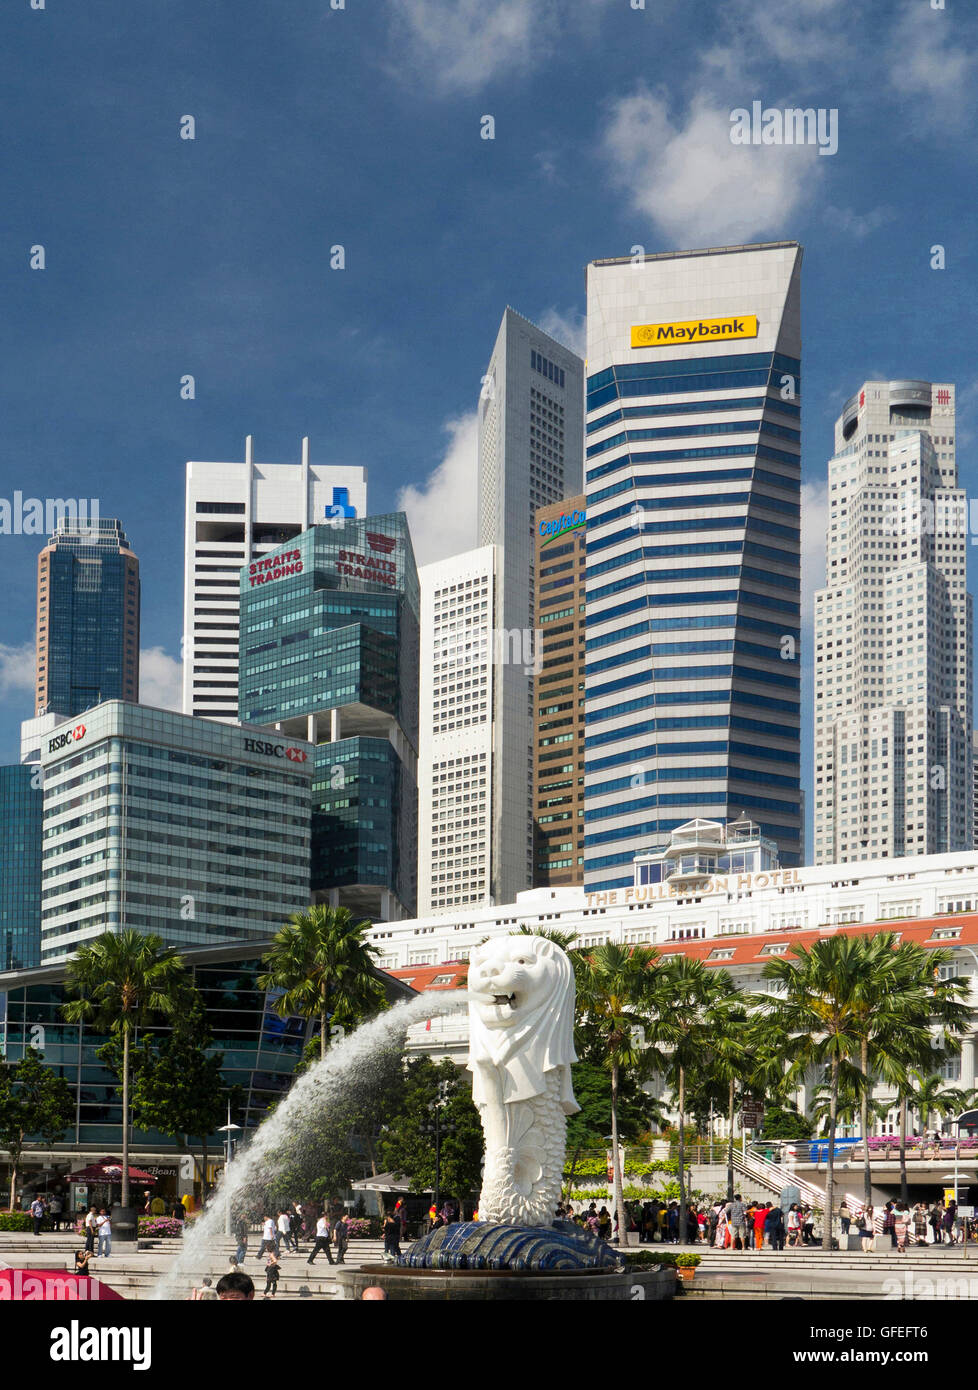 Merlion statue and water spout, Singapore waterfront, Singapore Stock Photo